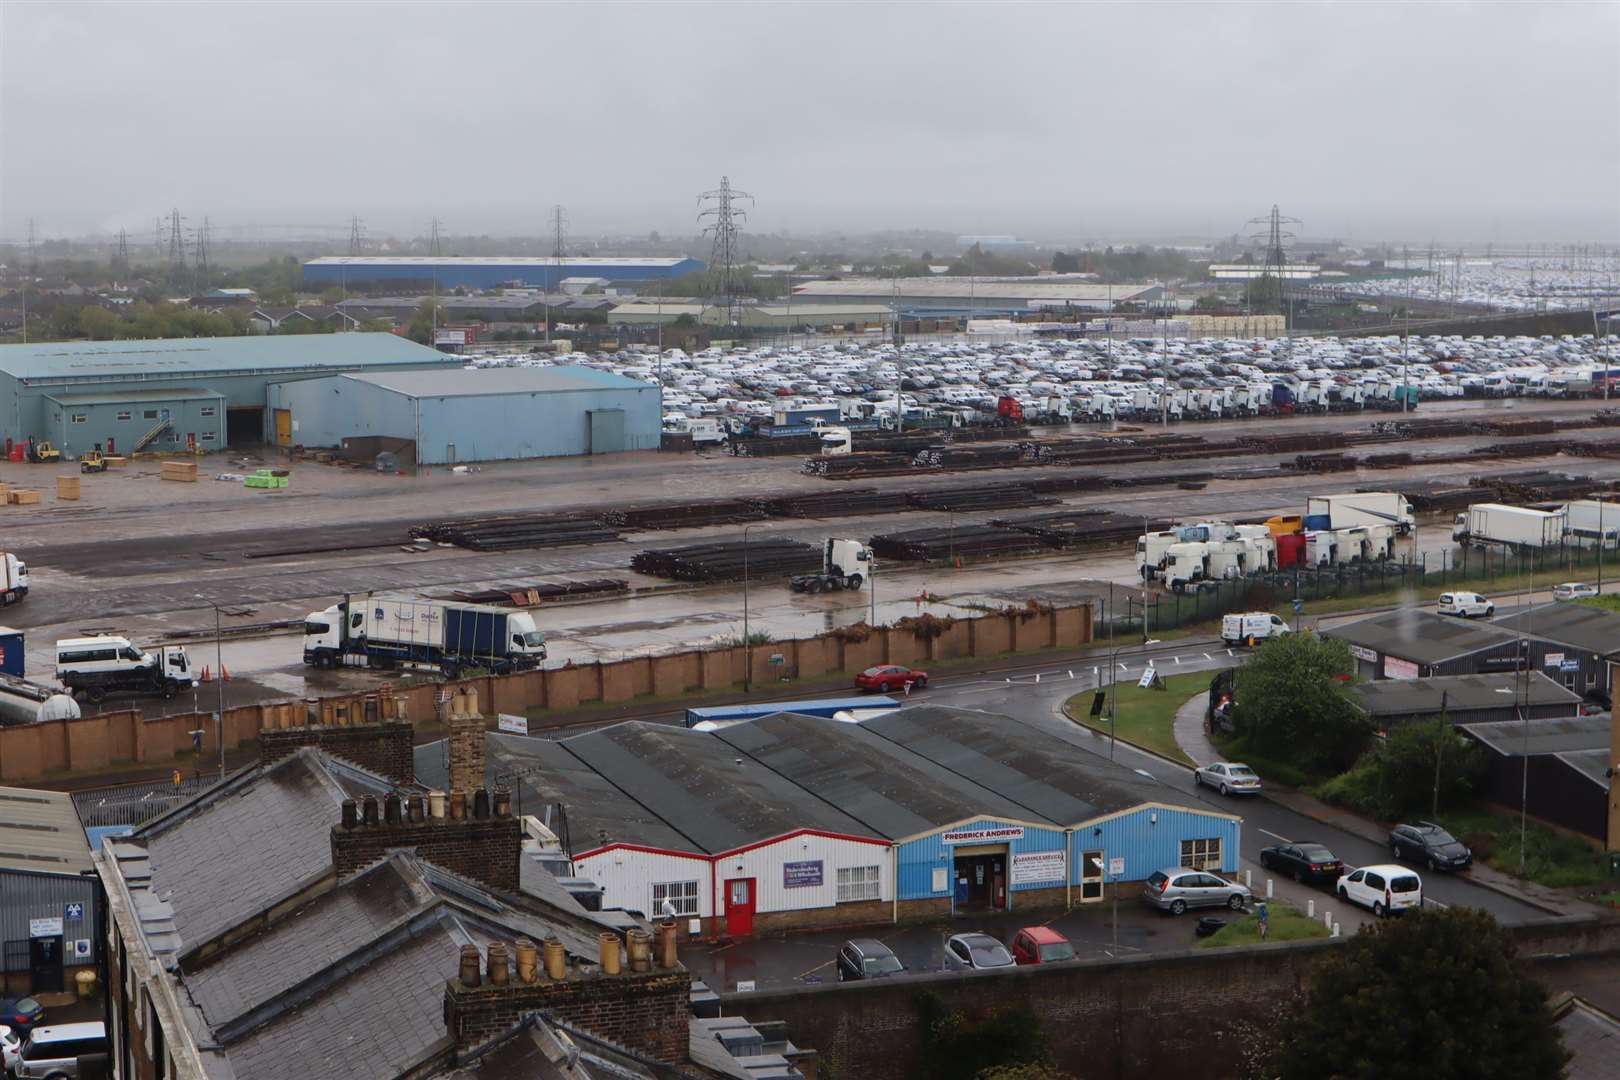 View looking over Peel Ports' storage park from the top of the Dockyard Church, Blue Town